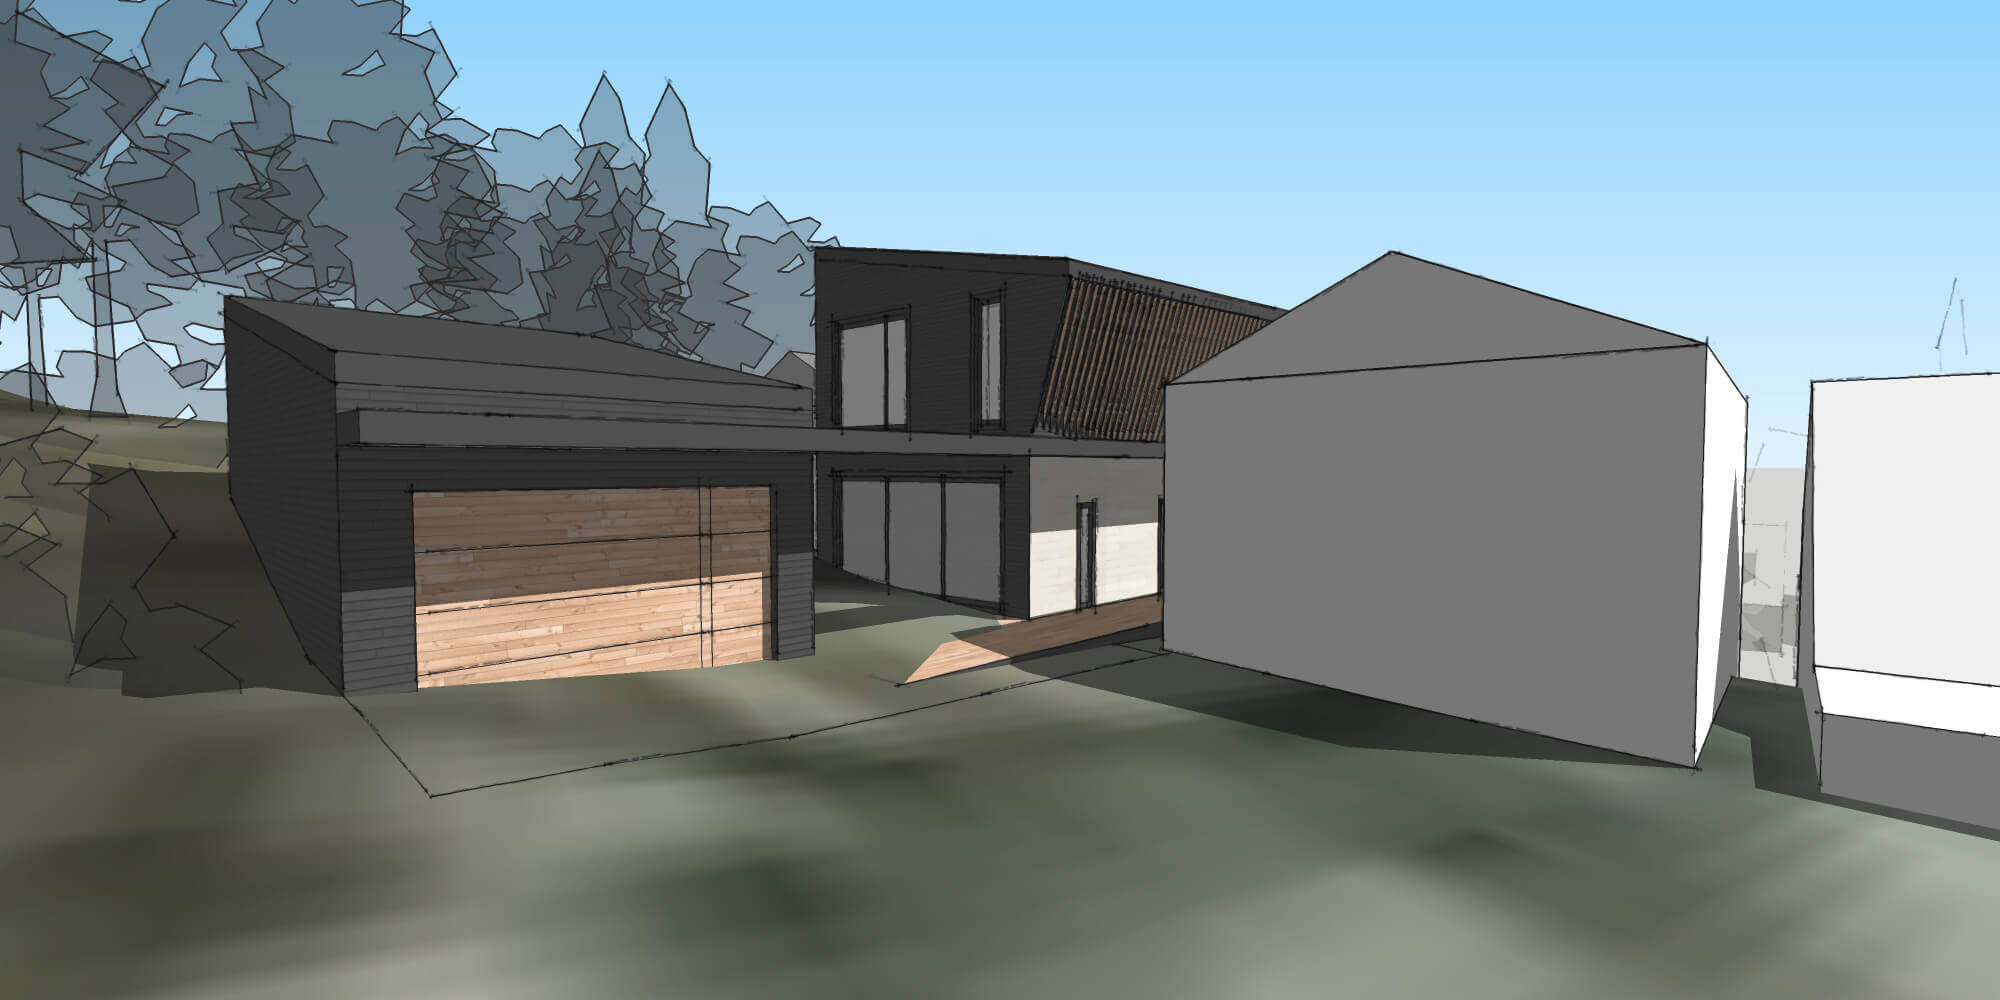 Garage Front Perspective - Sustainable Residential Addition Toronto